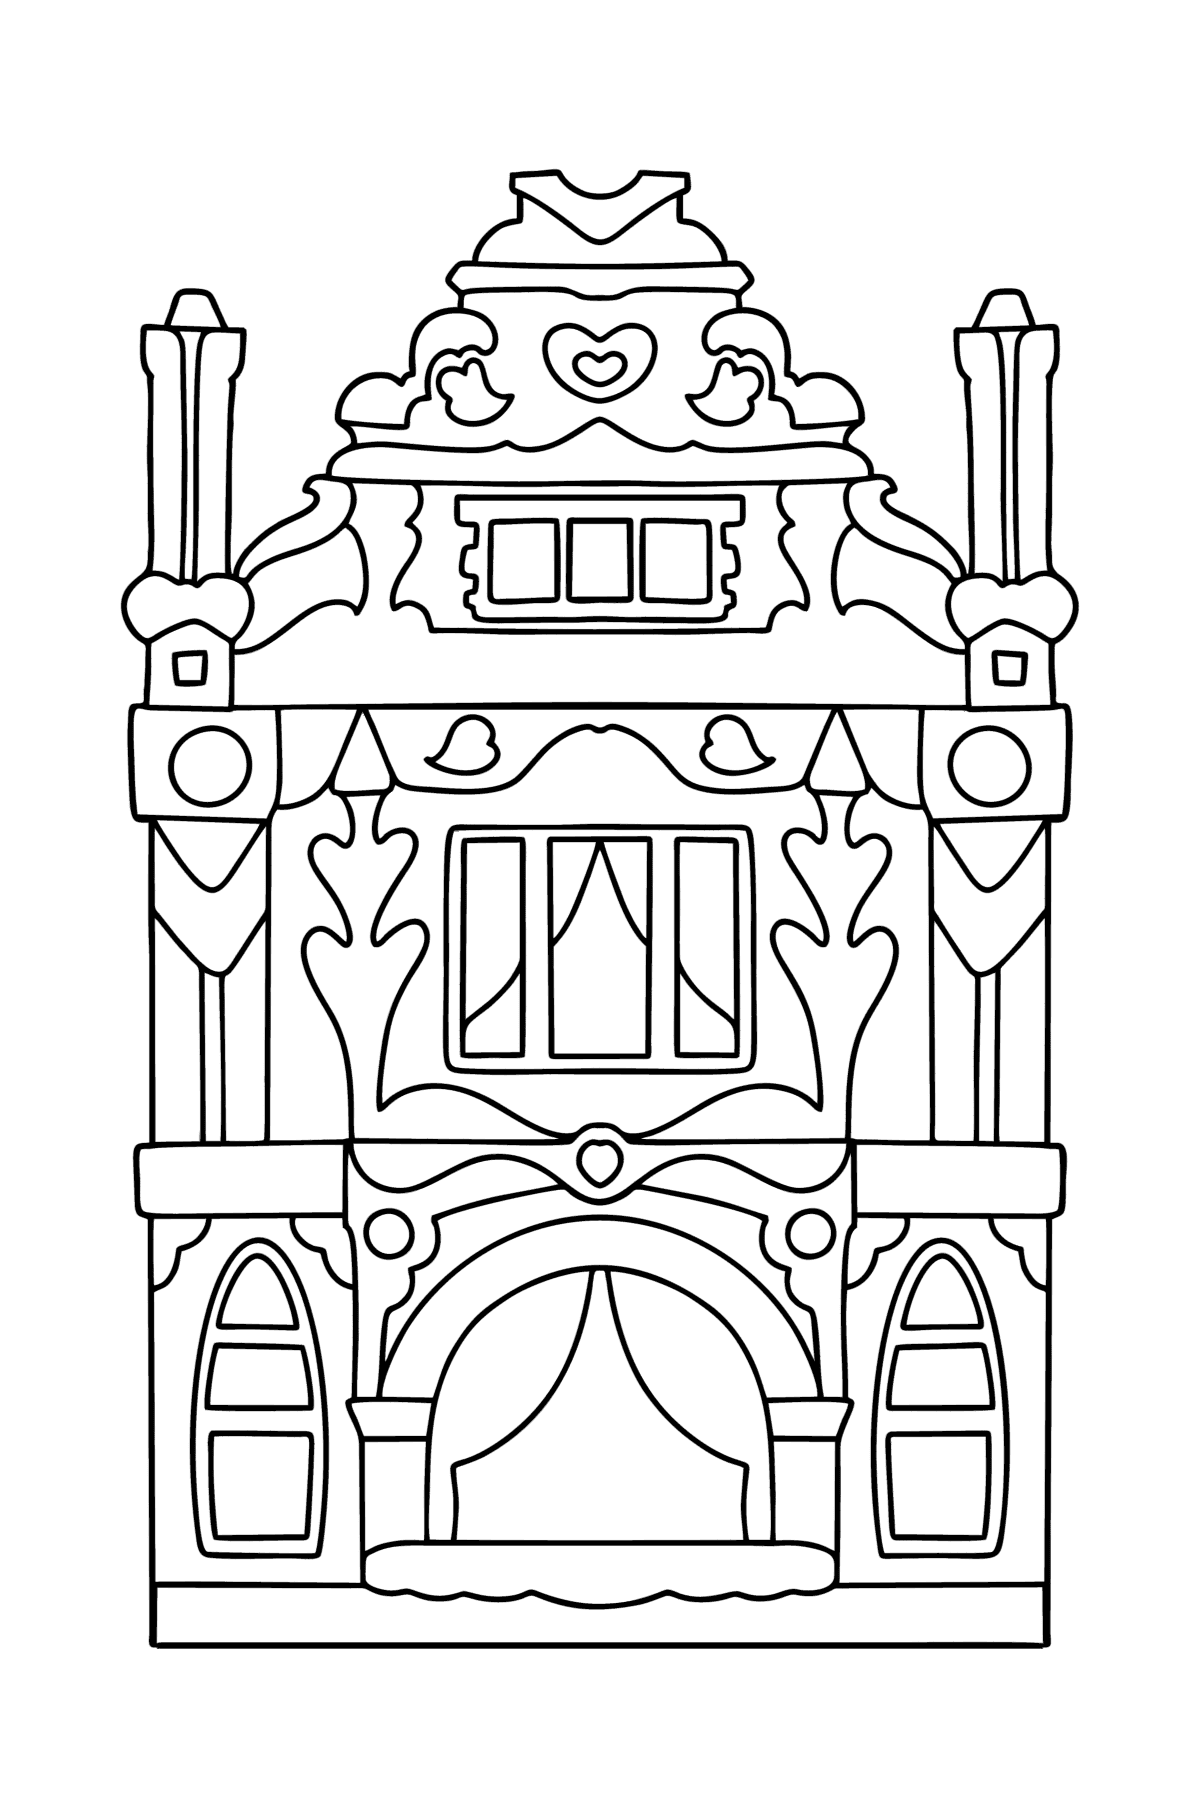 Two Storey House coloring page - Coloring Pages for Kids